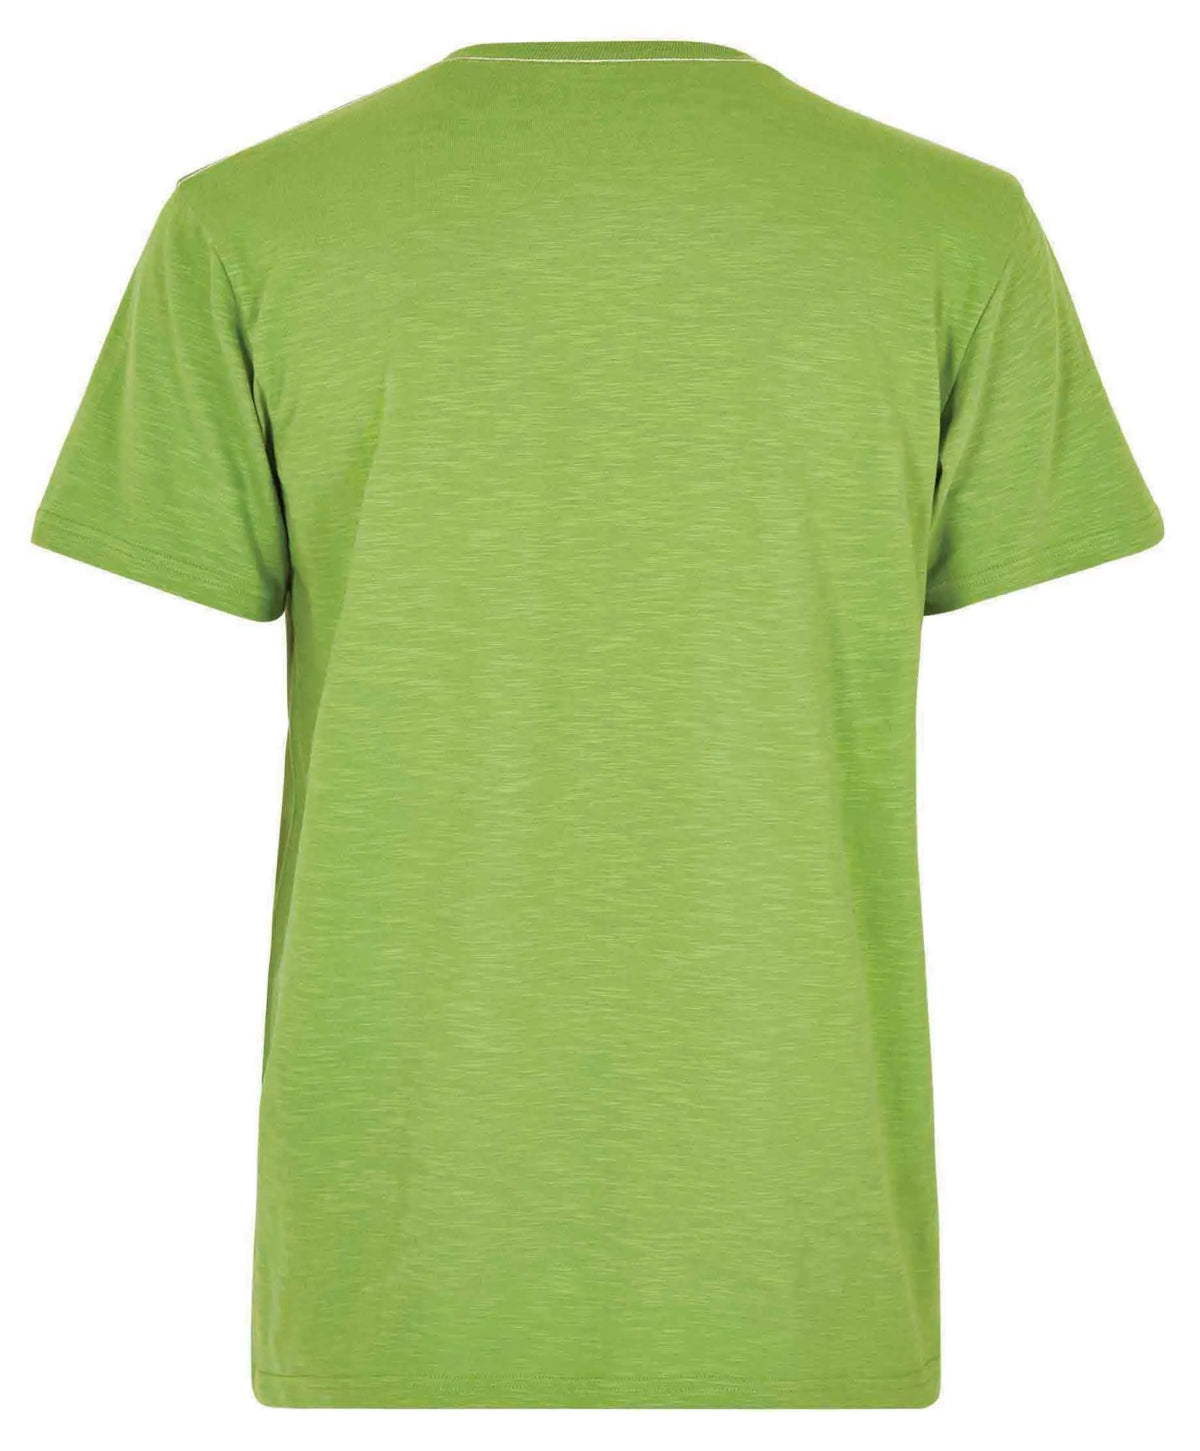 Men's plain short sleeve, crew neck Fished tee from Weird Fish in Kiwi Green.